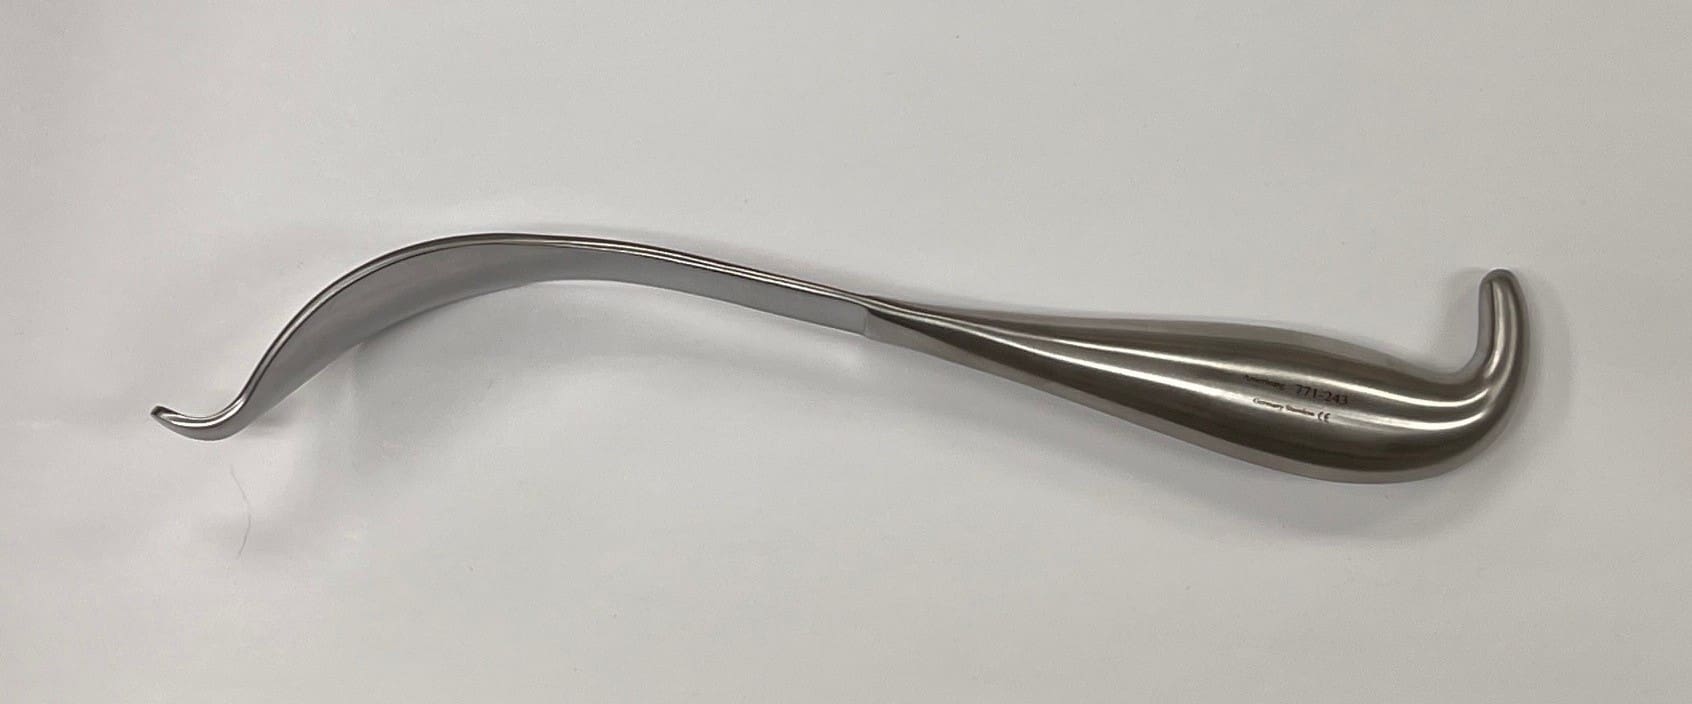 An AUFRANC COBRA RETRACTOR with a curved shape hanging on a wall.